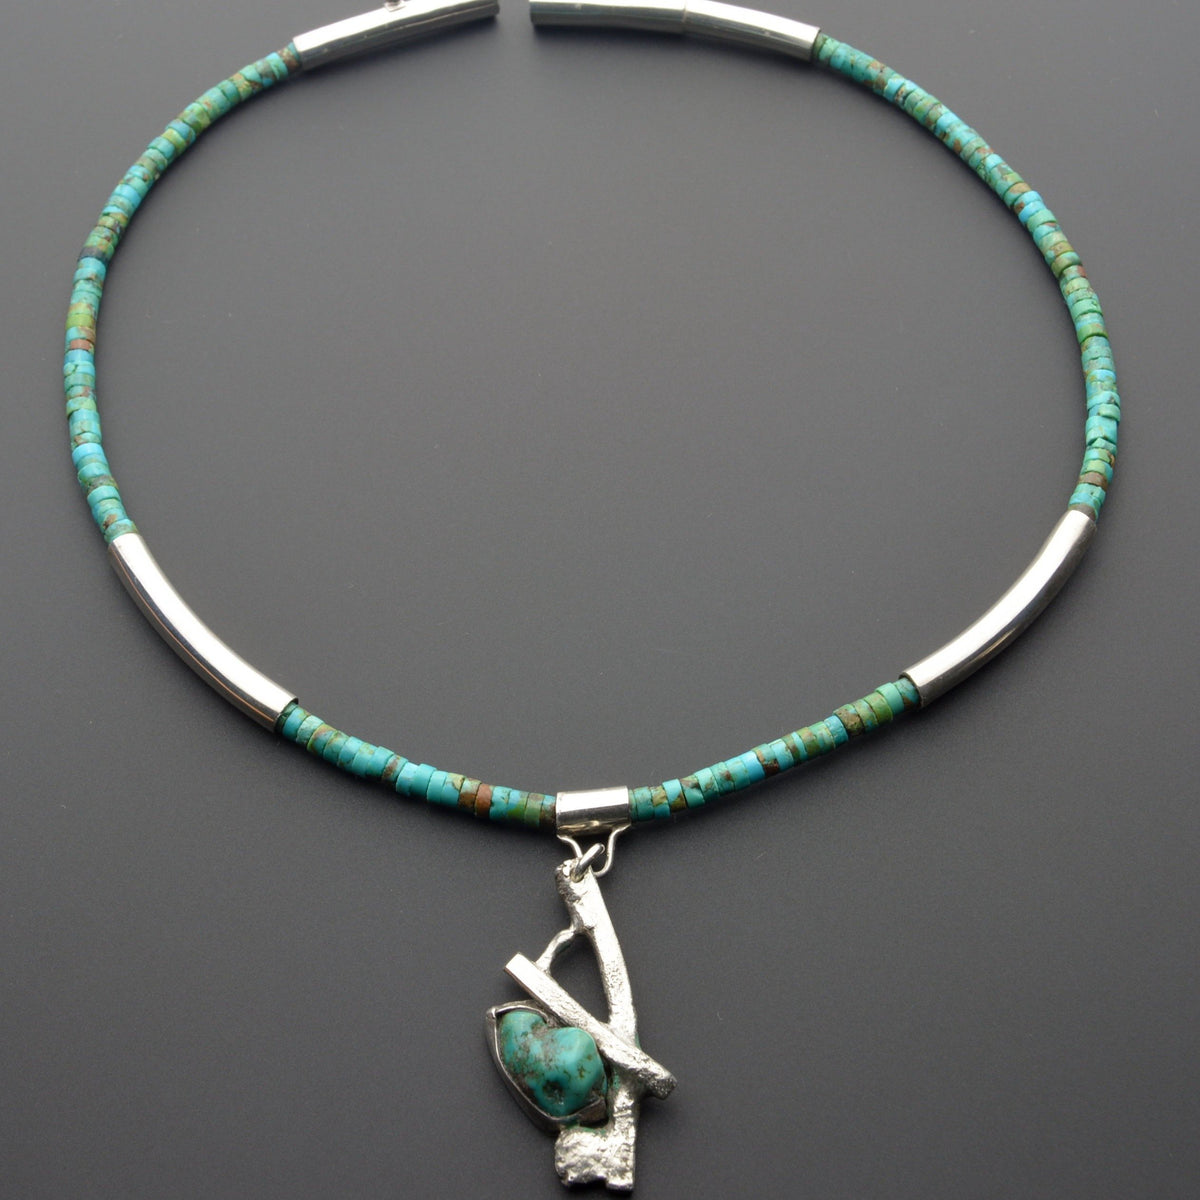 Unique turquoise silver choker one of a kind jewelry